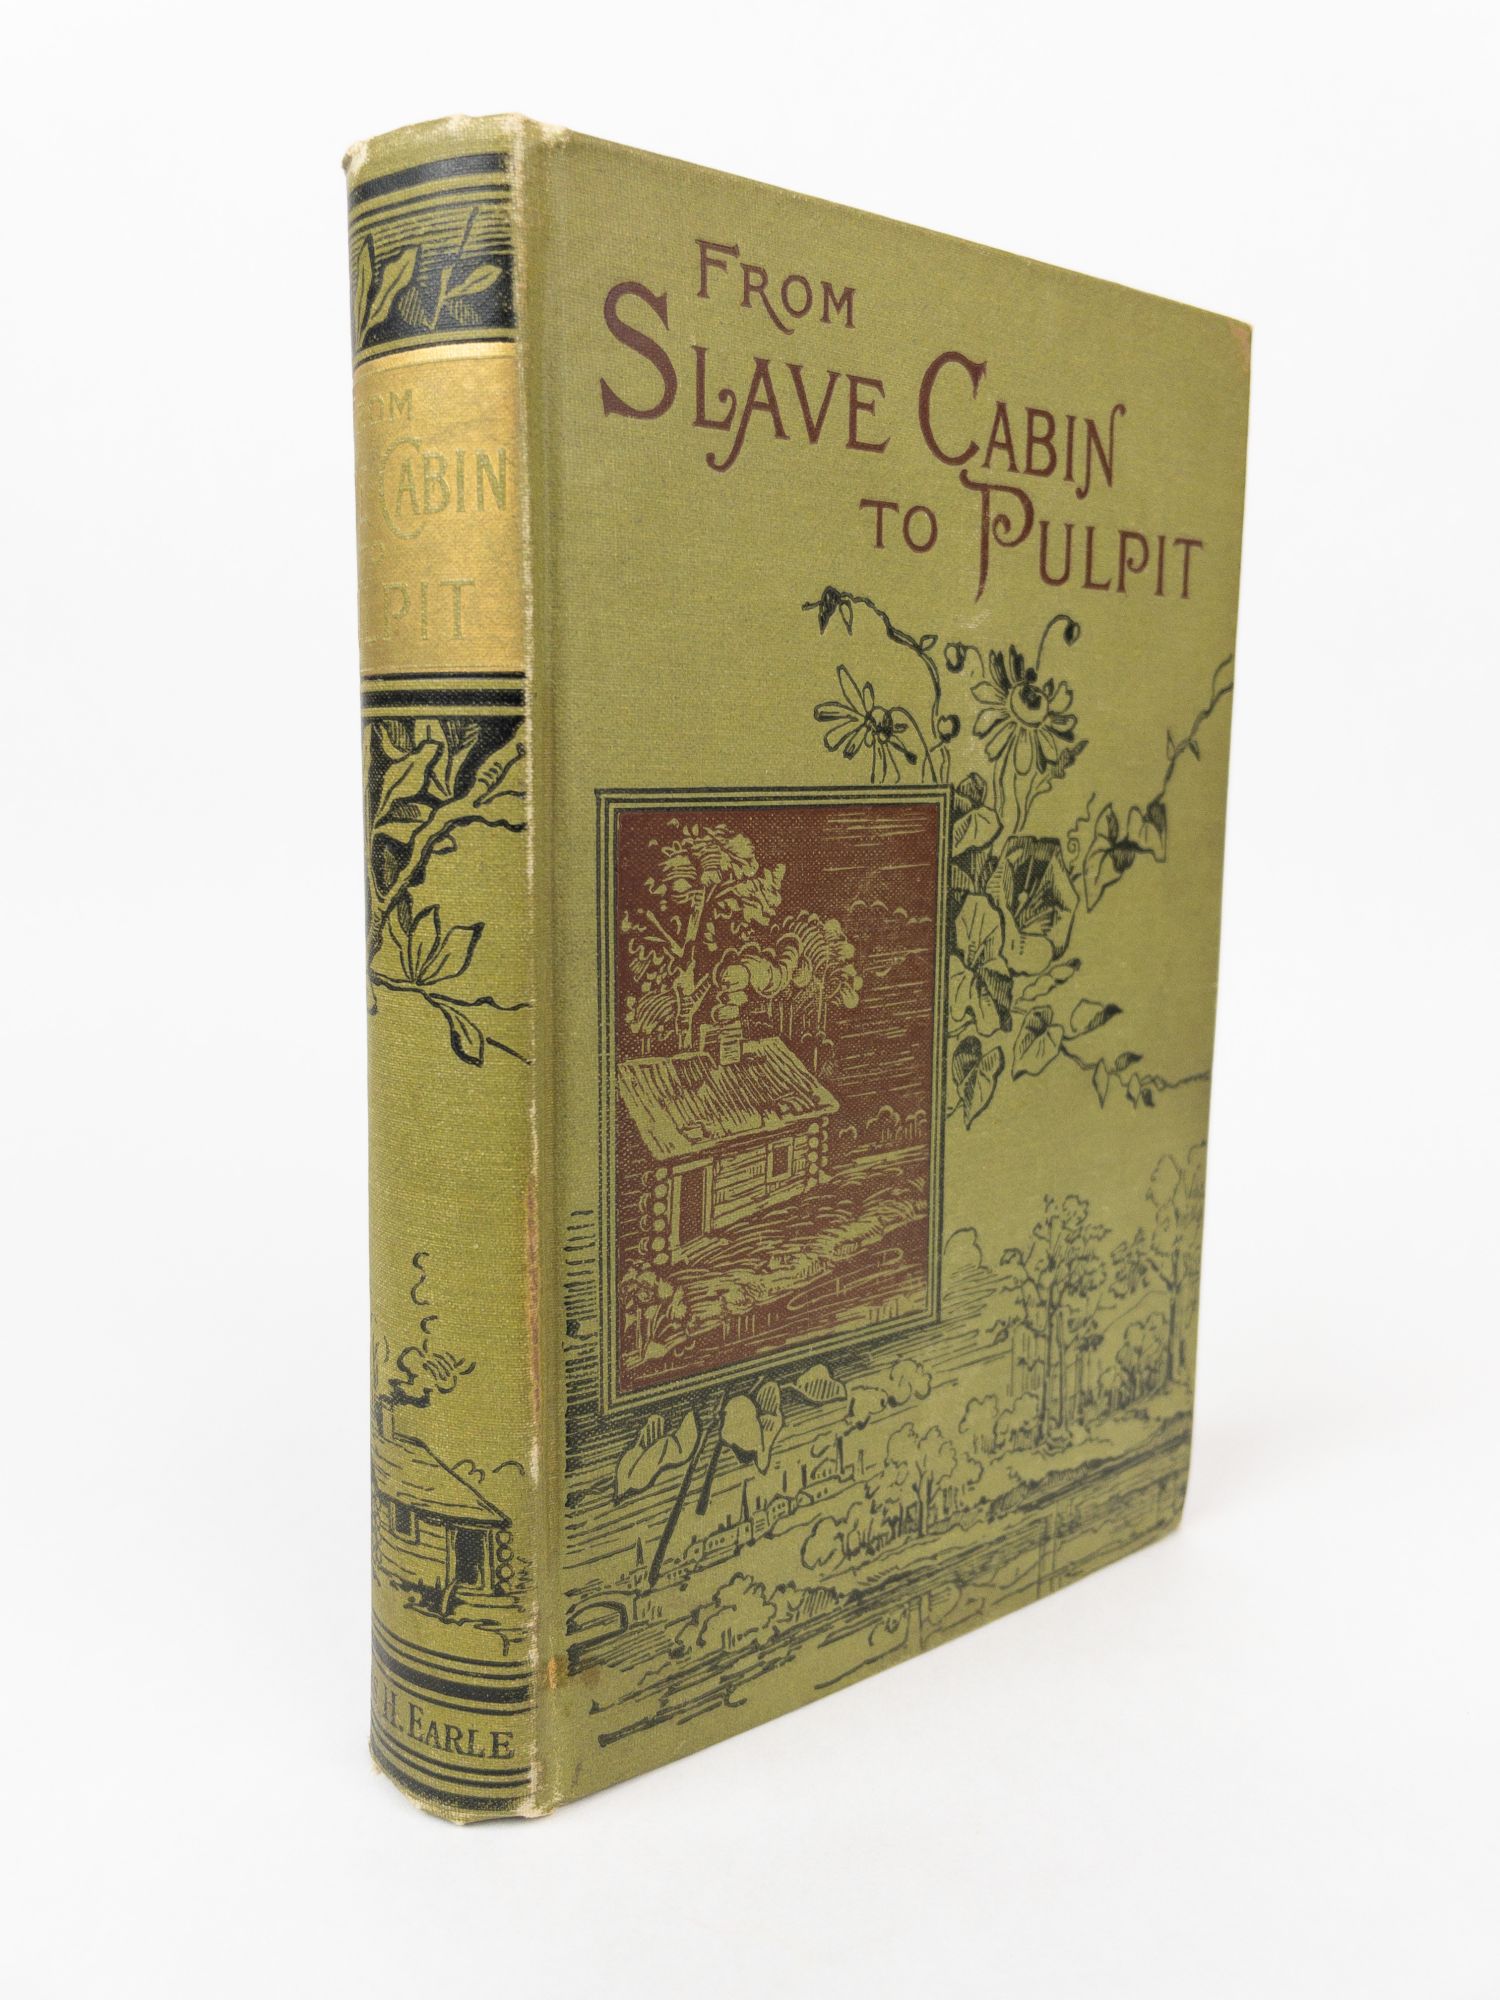 Product Image for FROM SLAVE CABIN TO THE PULPIT